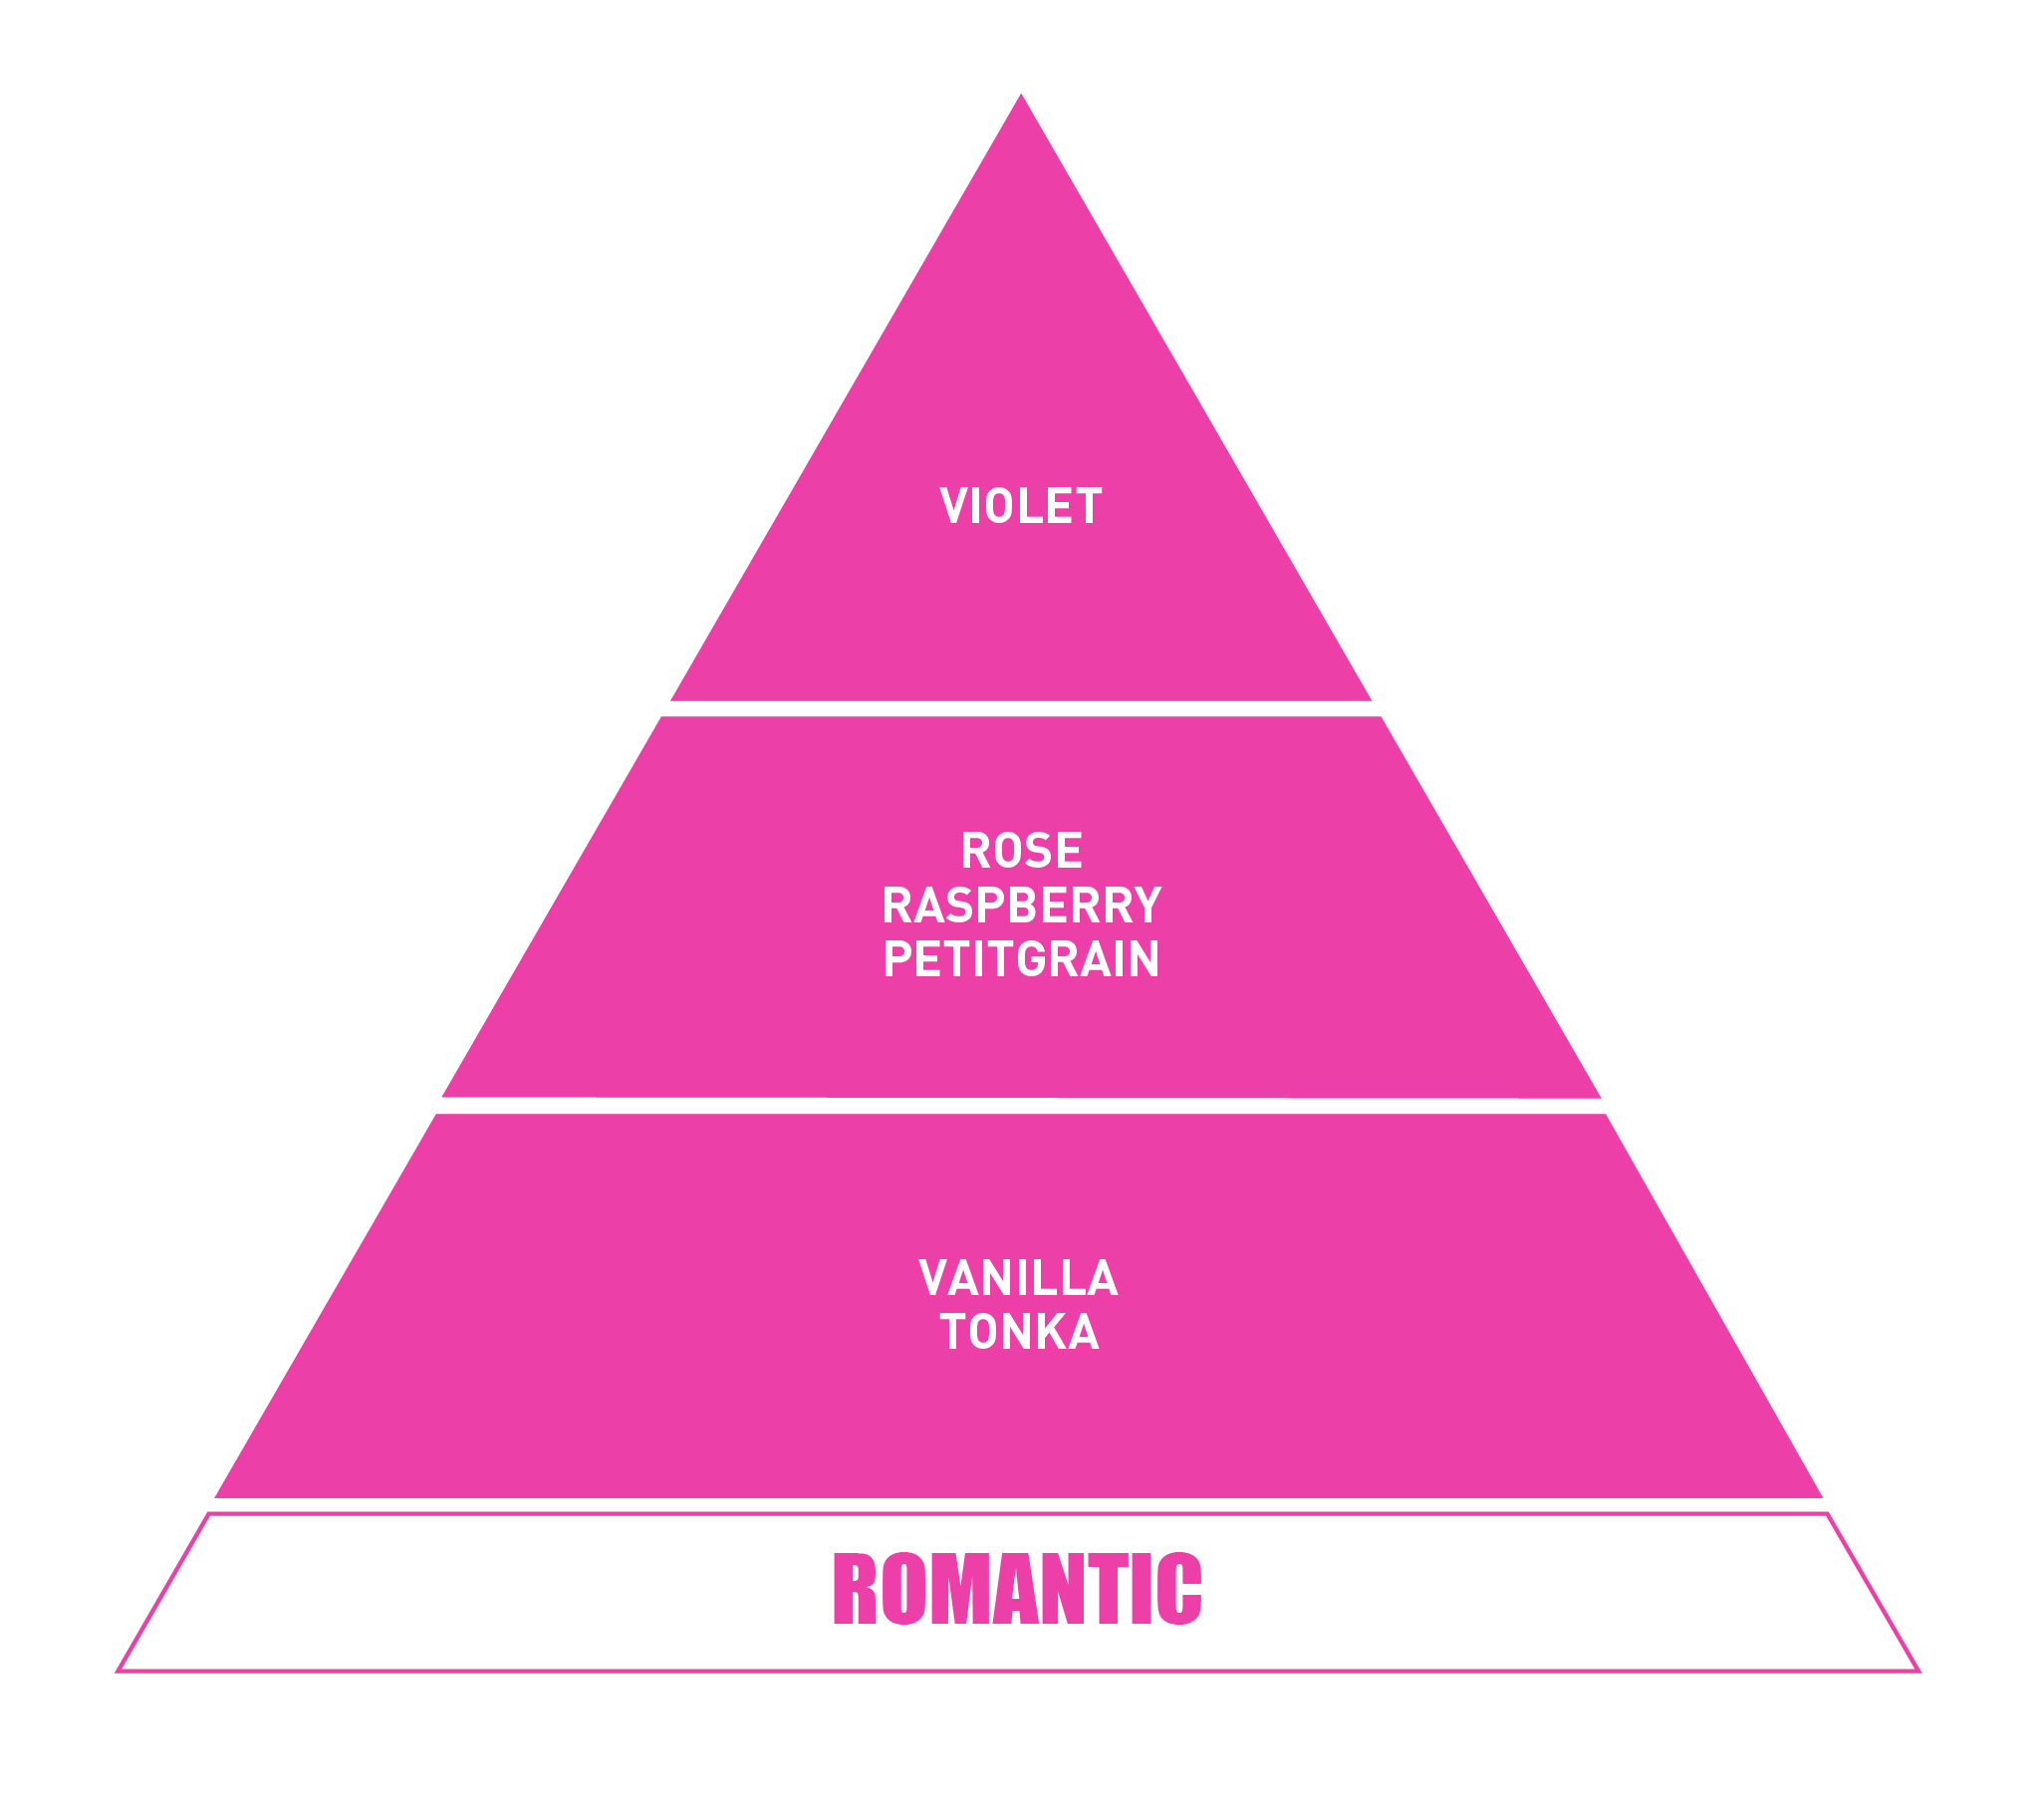 Luxury Brands Products Ranking Pyramid